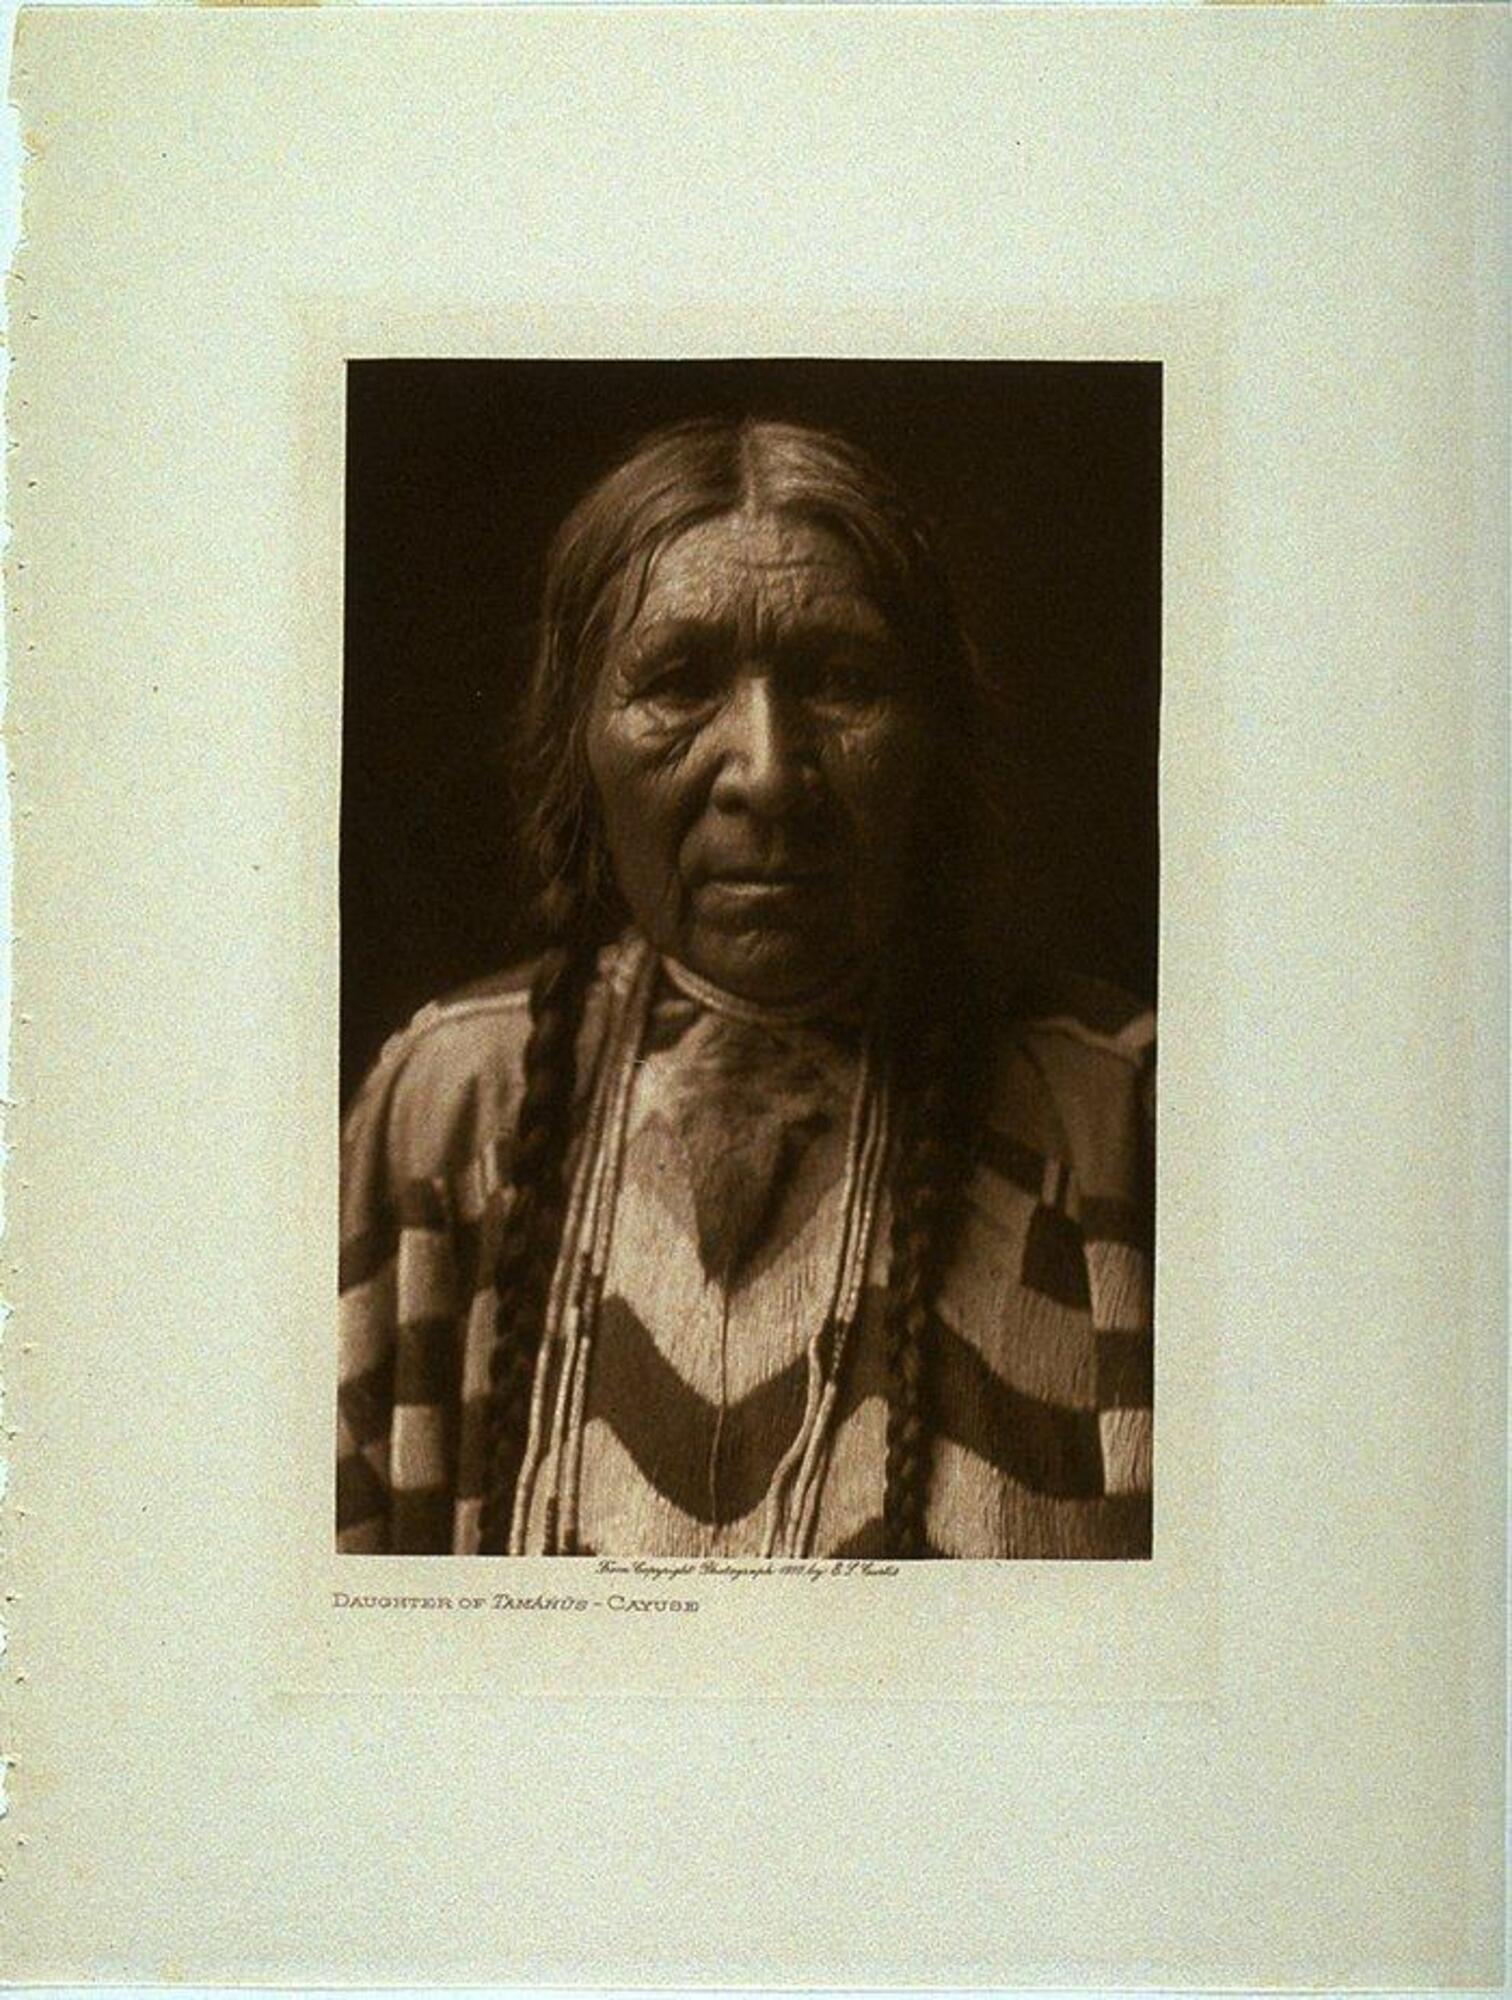 A portrait of an aging woman. She looks directly into the lens, wearing braids, strands of beaded necklaces, and a garment with geometric lines.